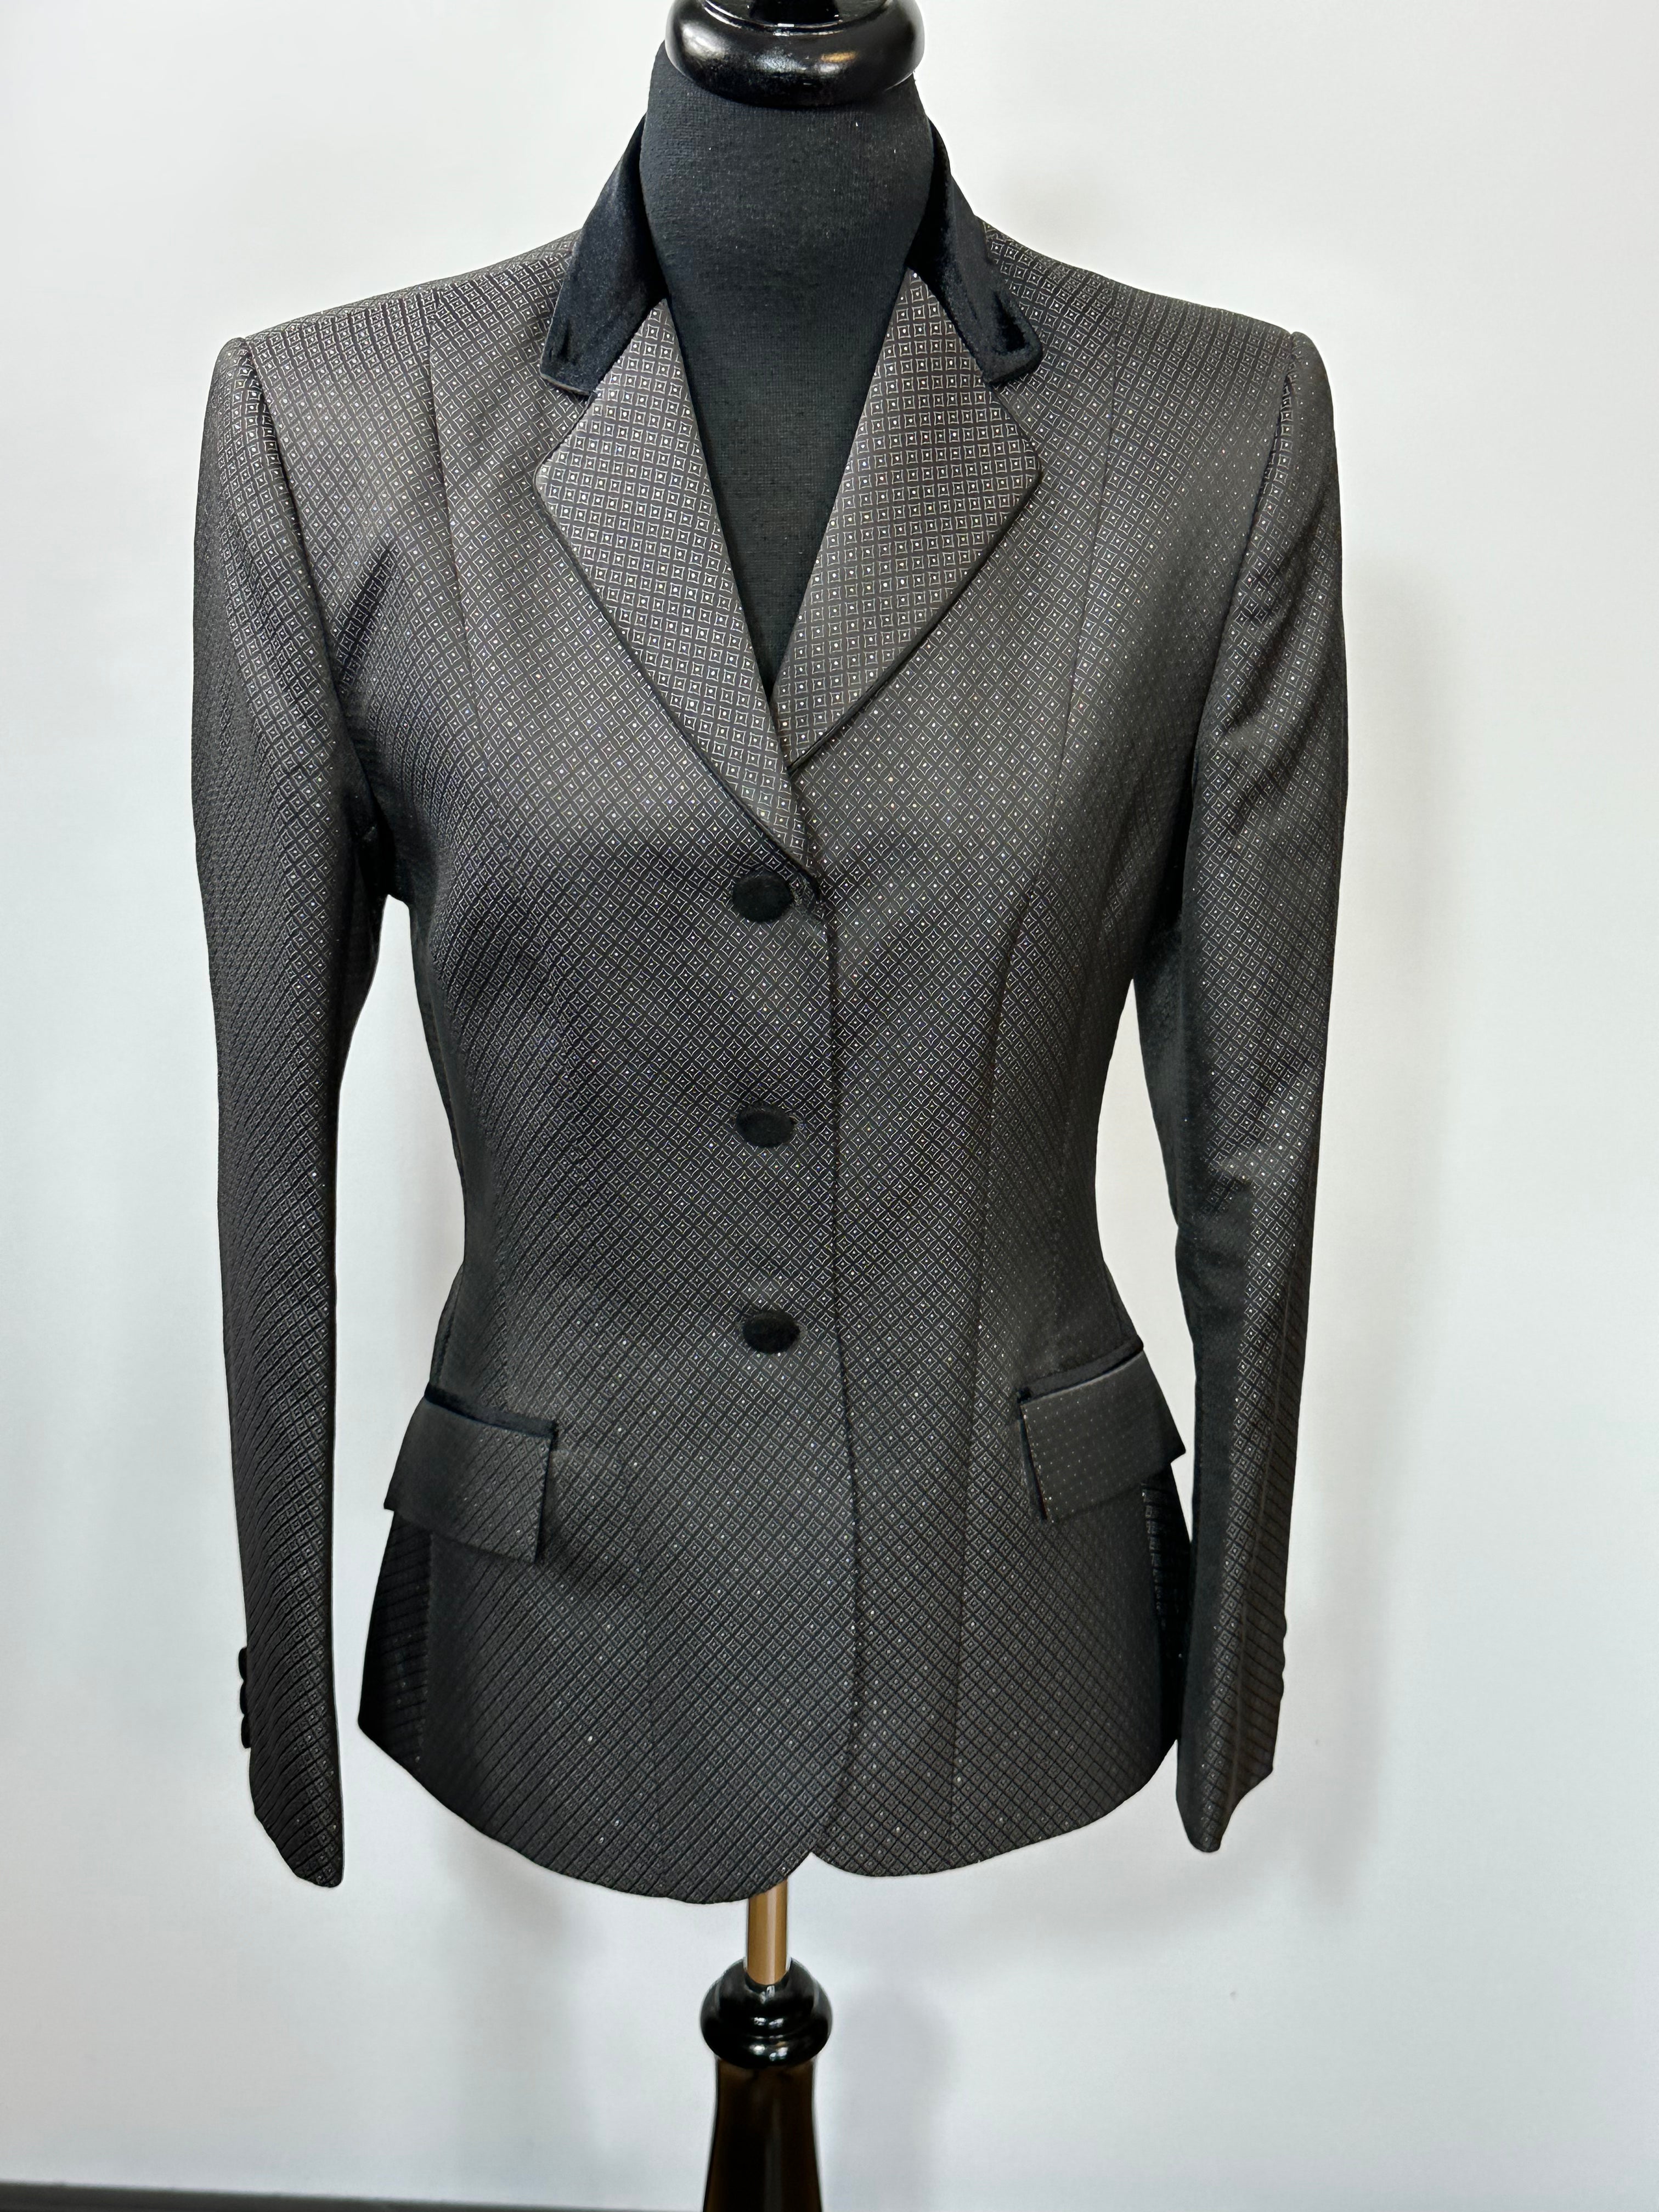 English Show Coat Black with Grey and Silver Mini Diamonds Fabric Code 480-CER-025